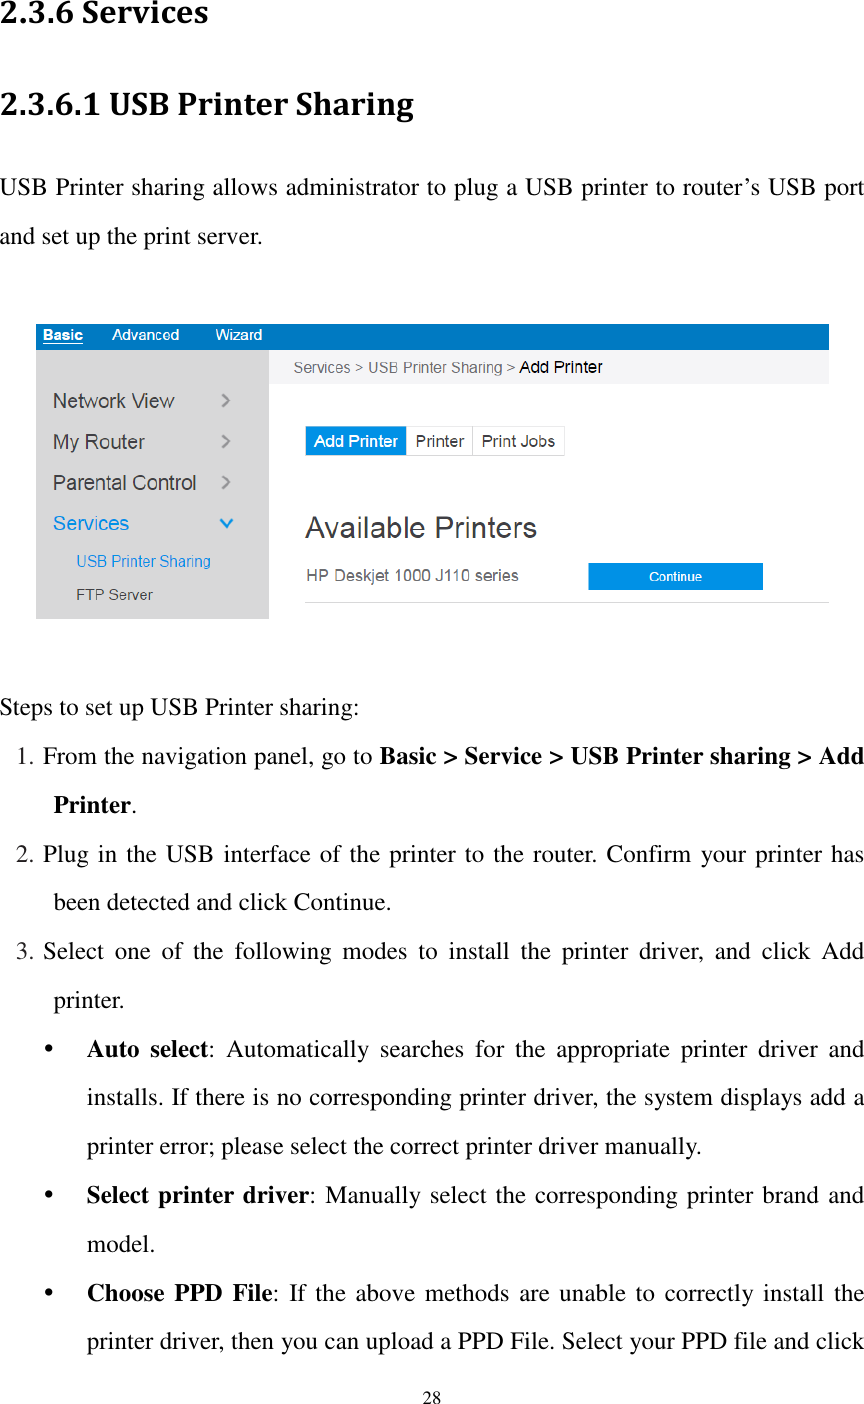  28  2.3.6 Services 2.3.6.1 USB Printer Sharing USB Printer sharing allows administrator to plug a USB printer to router’s USB port and set up the print server.    Steps to set up USB Printer sharing: 1. From the navigation panel, go to Basic &gt; Service &gt; USB Printer sharing &gt; Add Printer. 2. Plug in the USB interface of the printer to the router. Confirm your printer has been detected and click Continue. 3. Select  one  of  the  following  modes  to  install  the  printer  driver,  and  click  Add printer.  Auto  select:  Automatically  searches  for  the  appropriate  printer  driver  and installs. If there is no corresponding printer driver, the system displays add a printer error; please select the correct printer driver manually.  Select printer driver: Manually select the corresponding printer brand and model.  Choose PPD File: If the above methods are unable to  correctly install the printer driver, then you can upload a PPD File. Select your PPD file and click 